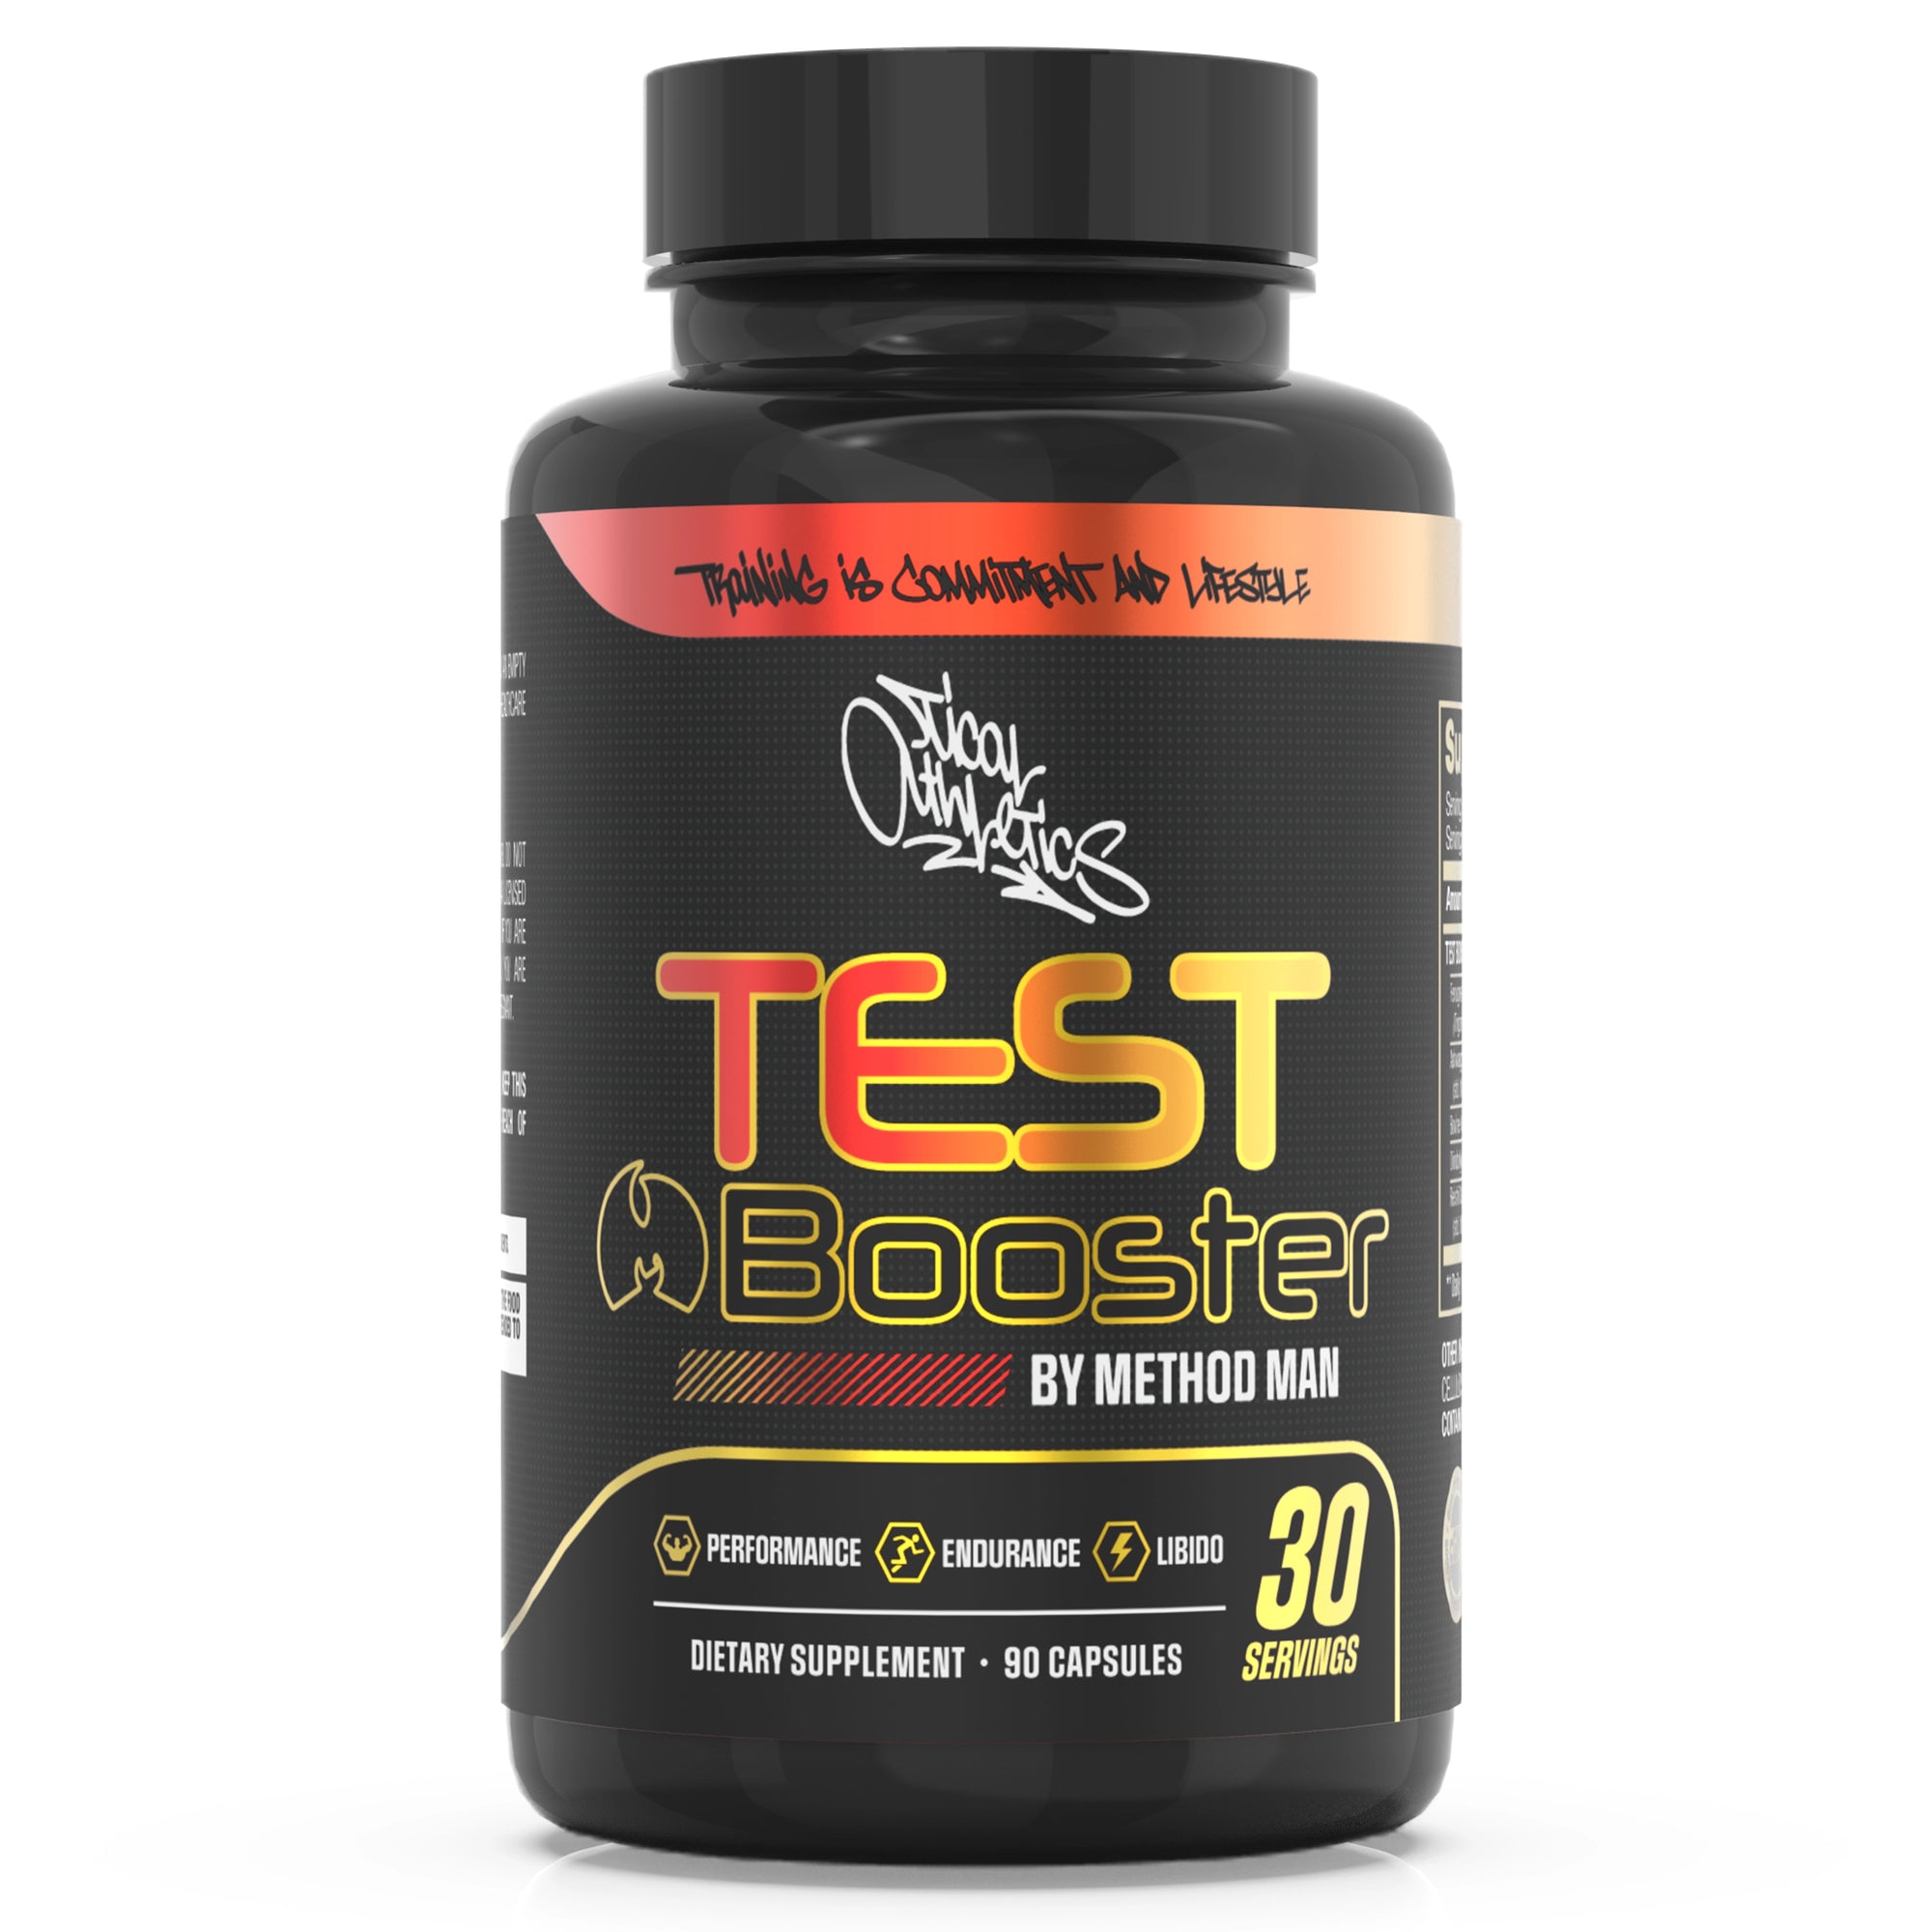 Tical Test Booster